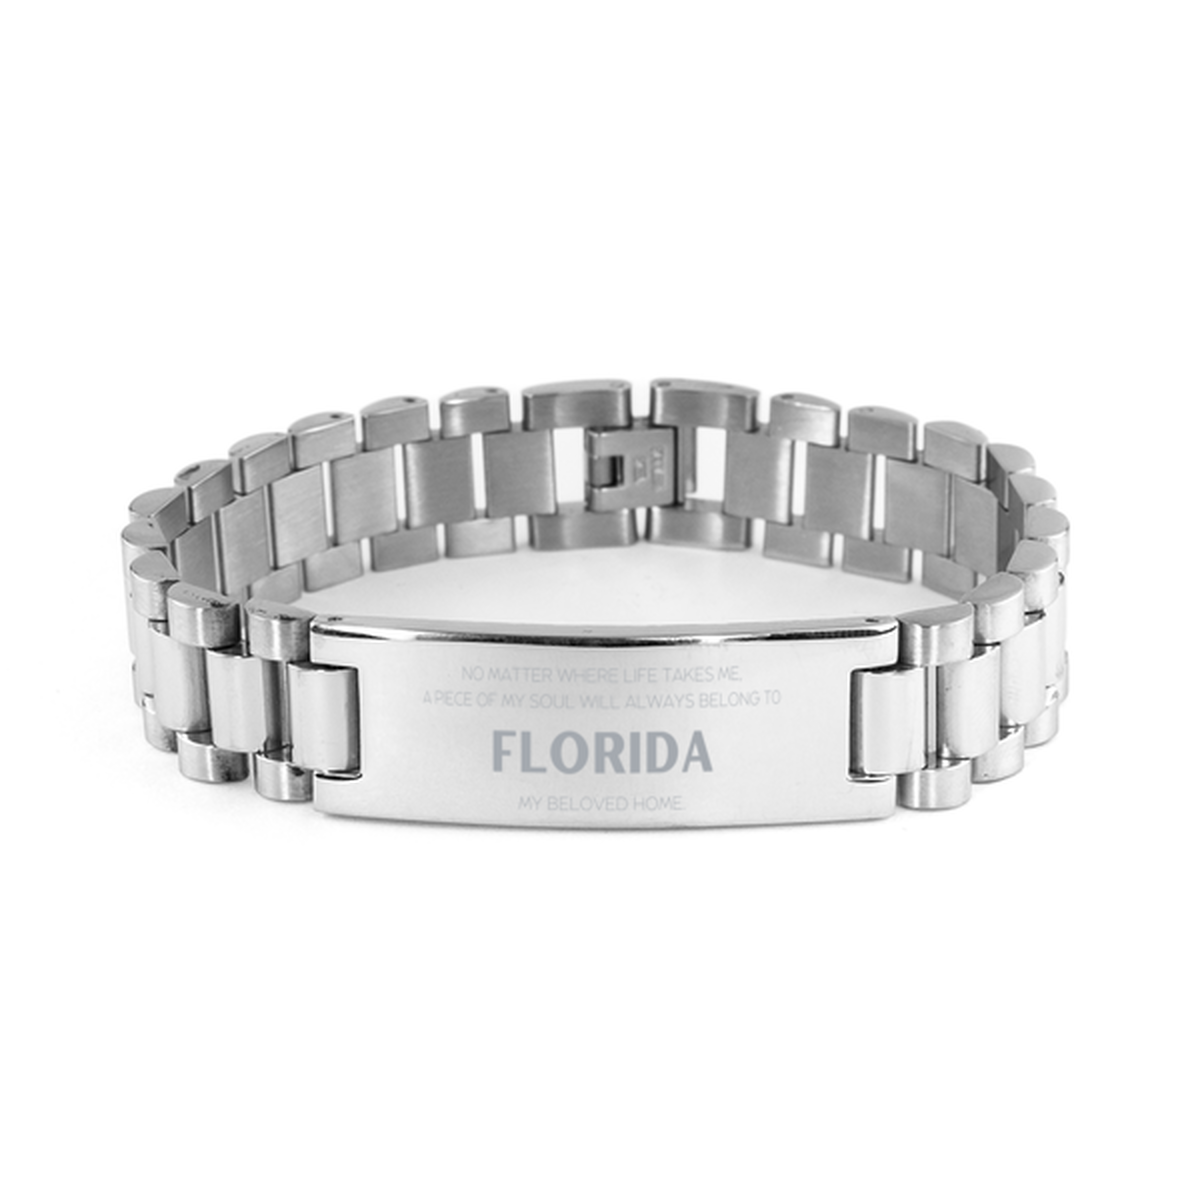 Love Florida State Gifts, My soul will always belong to Florida, Proud Ladder Stainless Steel Bracelet, Birthday Unique Gifts For Florida Men, Women, Friends